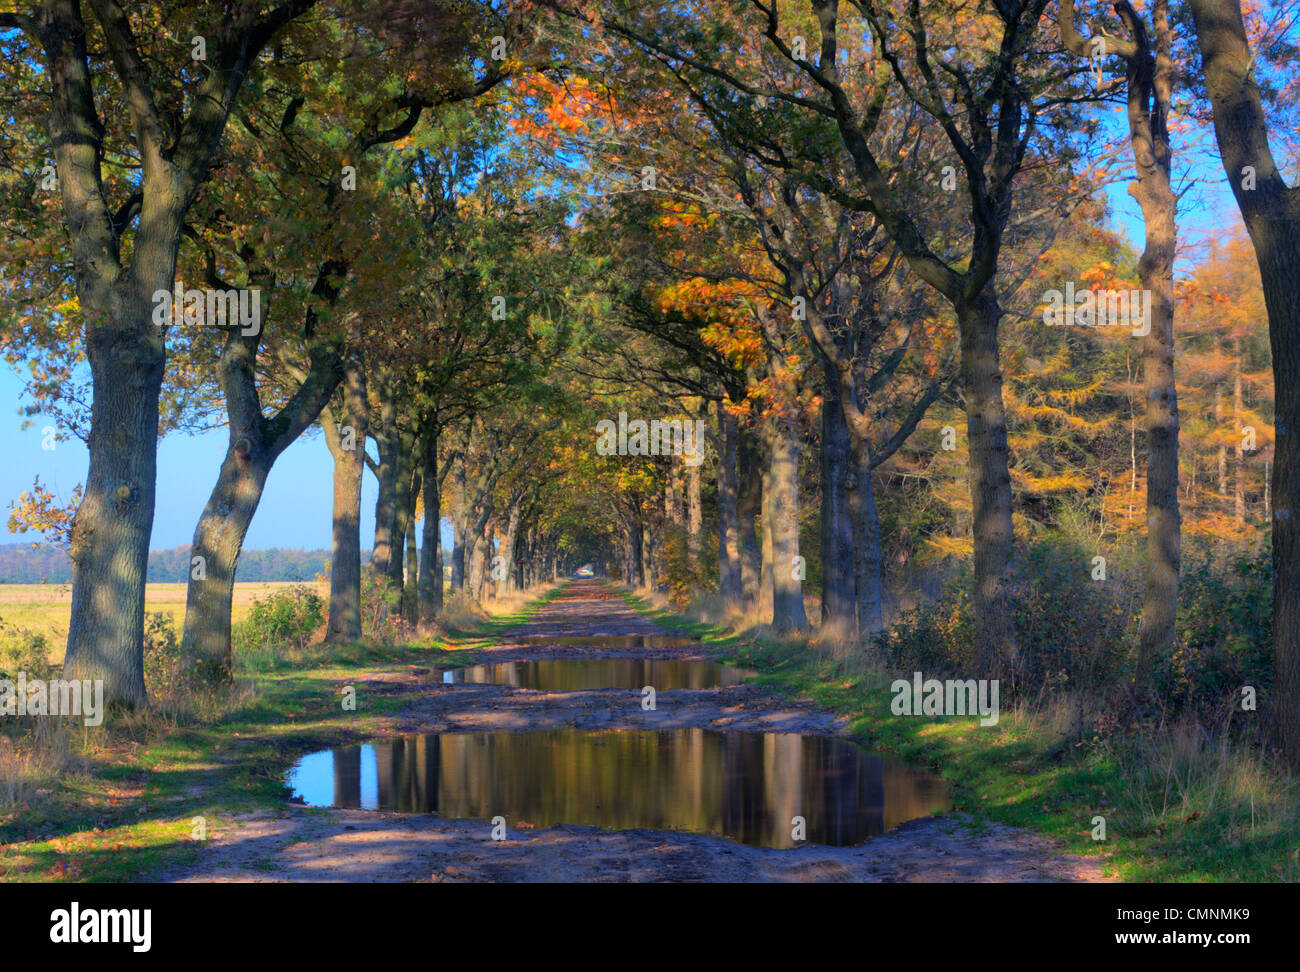 Muddy country road in autumn, oaks in autumn colors on both sides Stock Photo